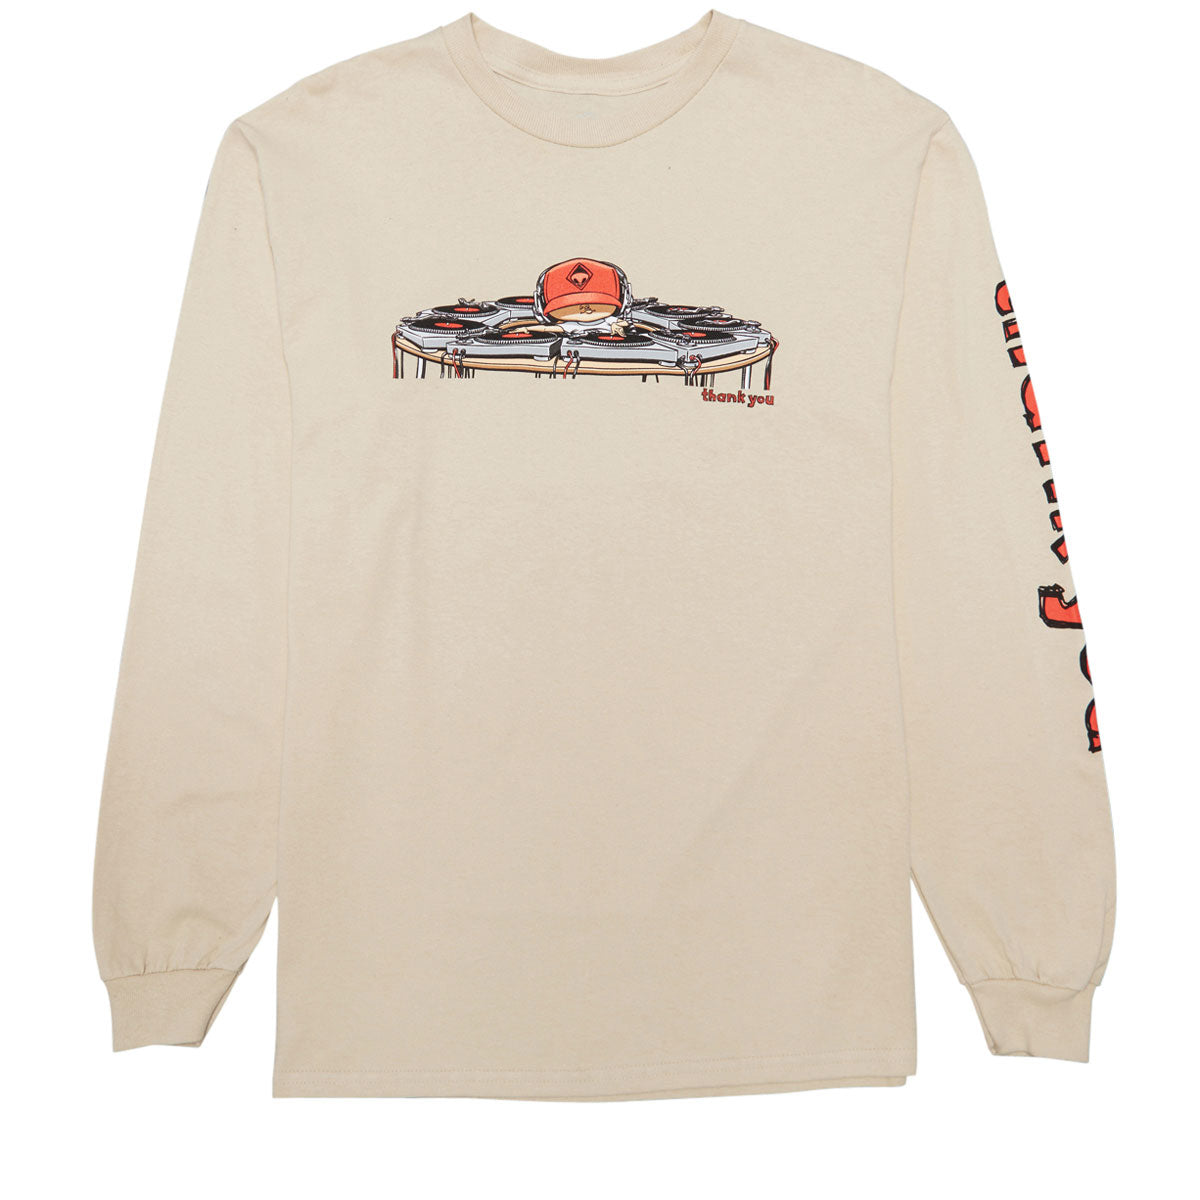 Thank You x Ronnie Creager Mix Master Long Sleeve T-Shirt - Cream image 1